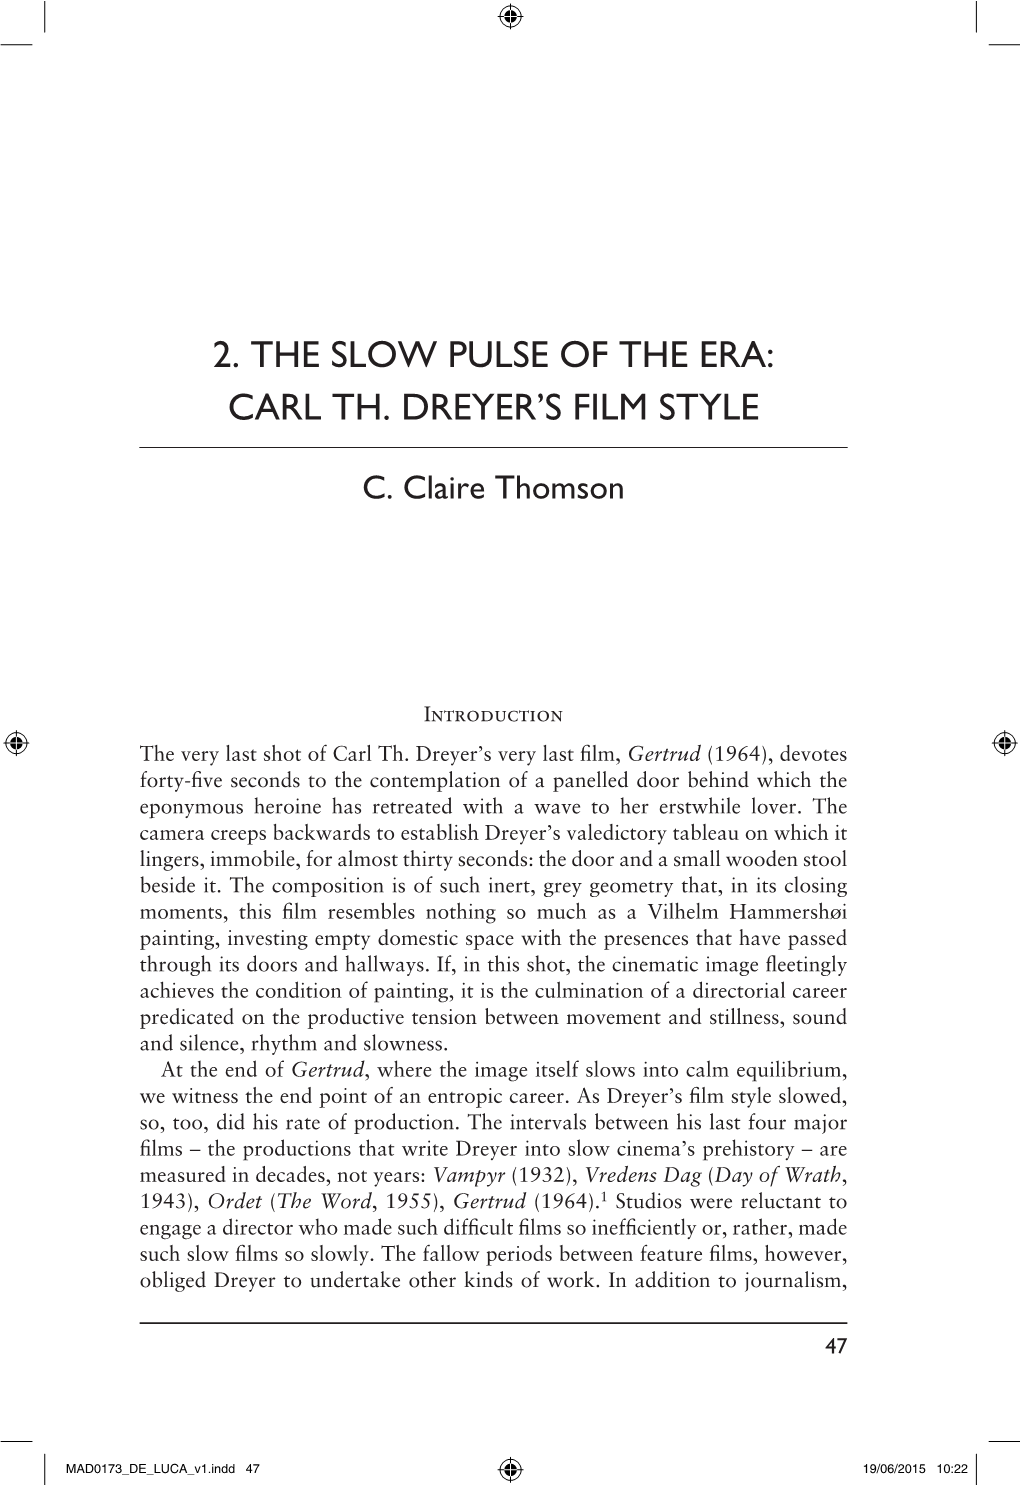 2. the Slow Pulse of the Era: Carl Th. Dreyer's Film Style